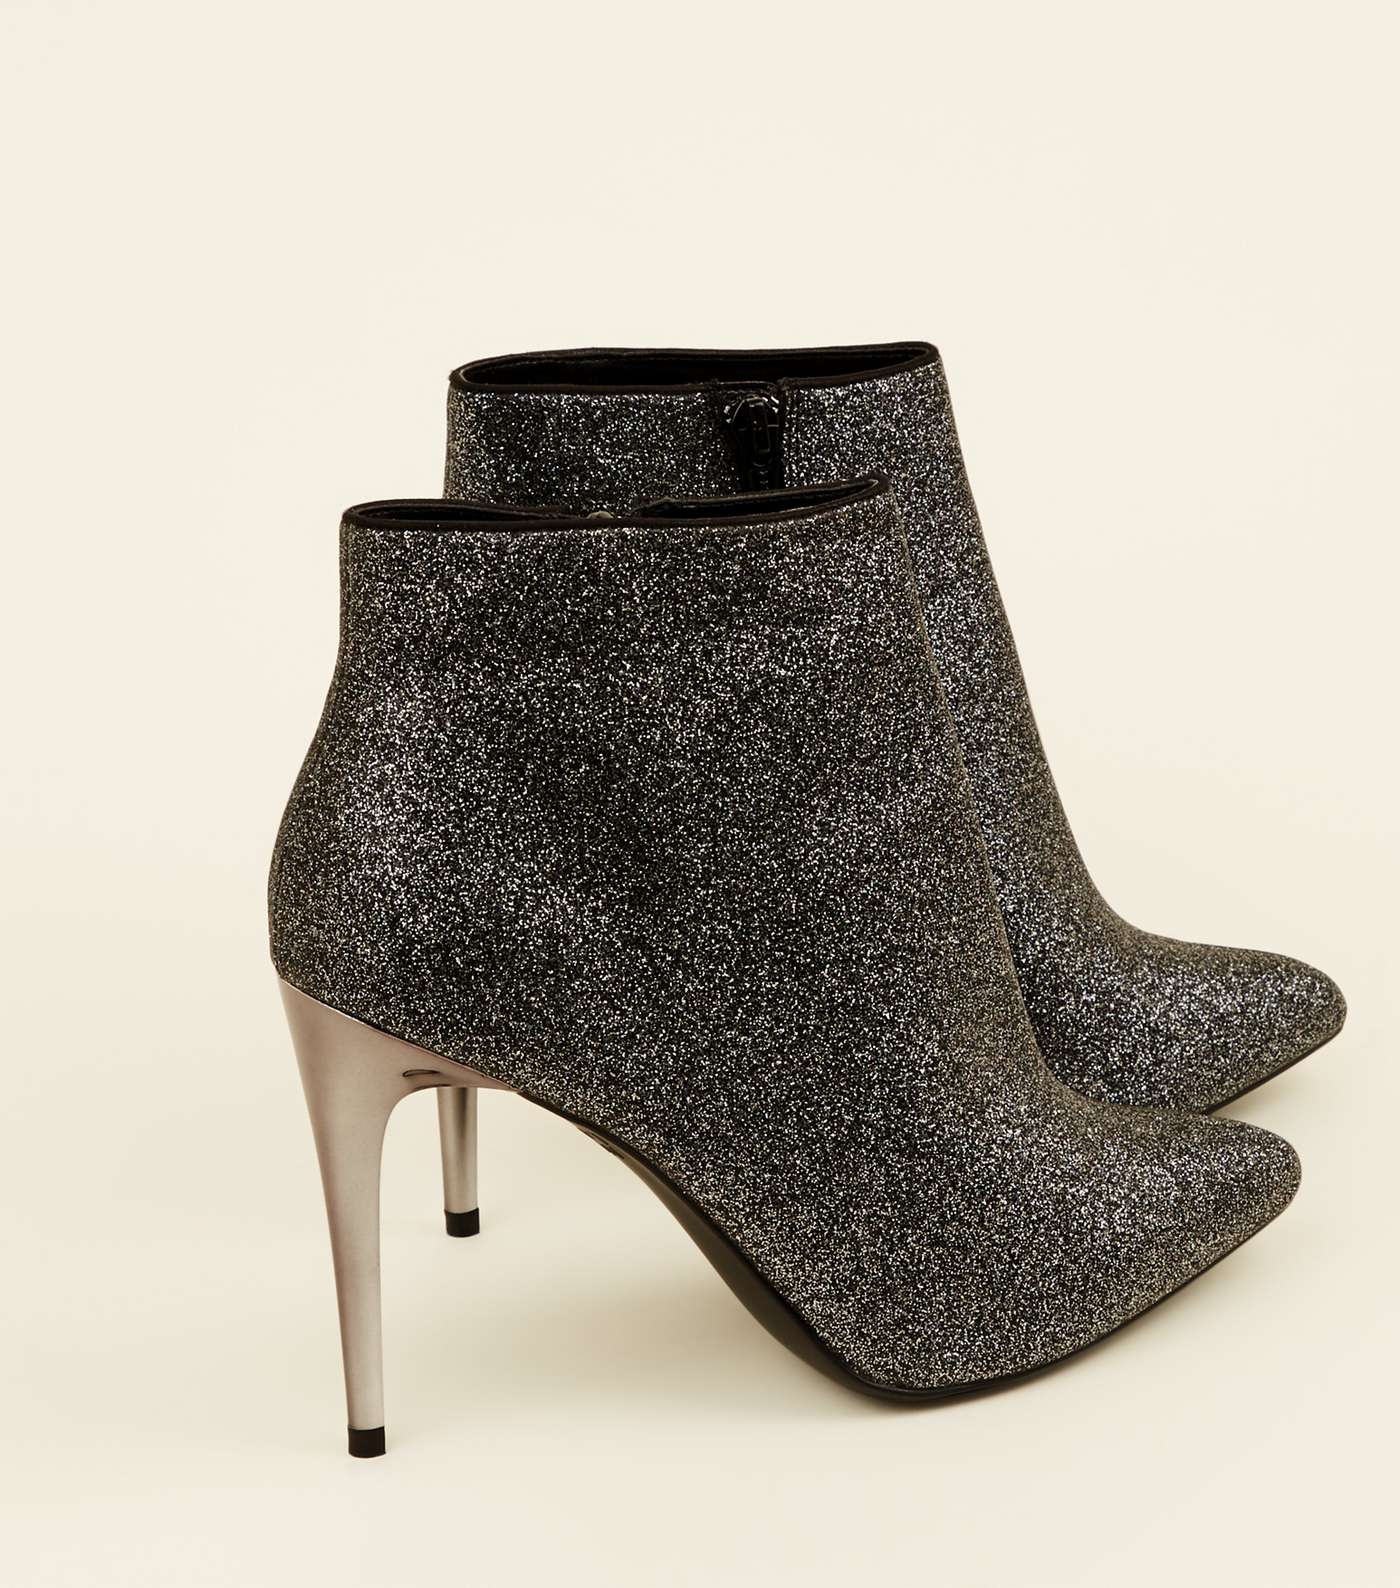 Pewter Glitter Metal Heel Ankle Boots Image 4